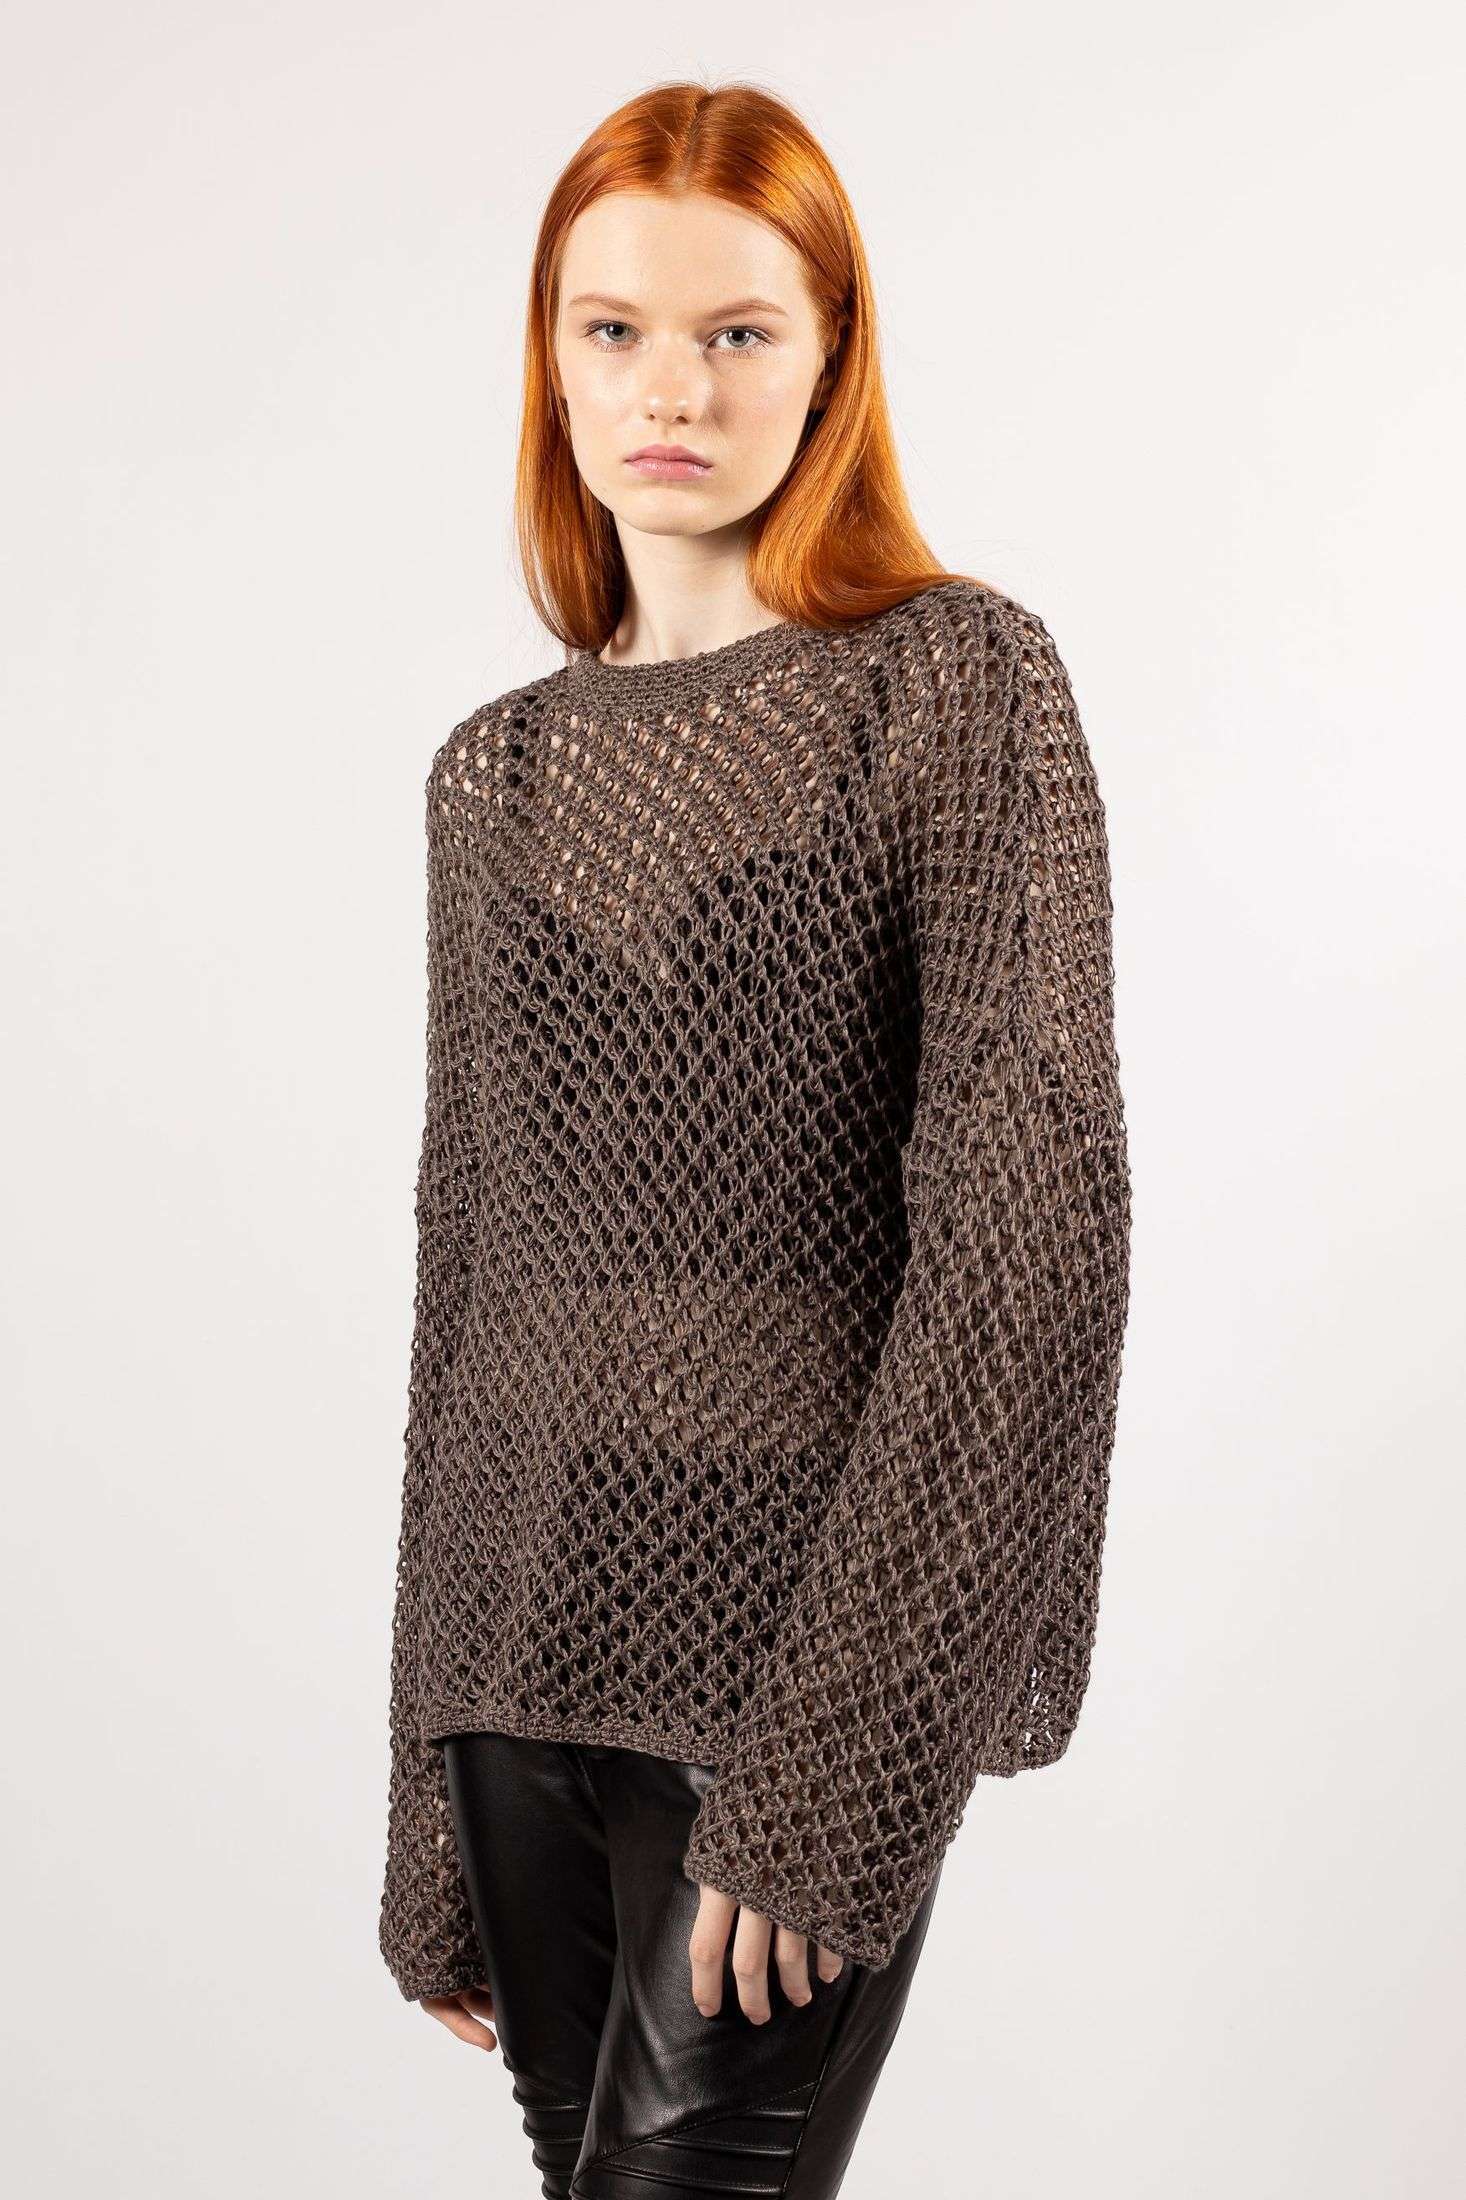 Versatile brown mesh-patterned linen sweater, ideal for both casual and dressy occasions.